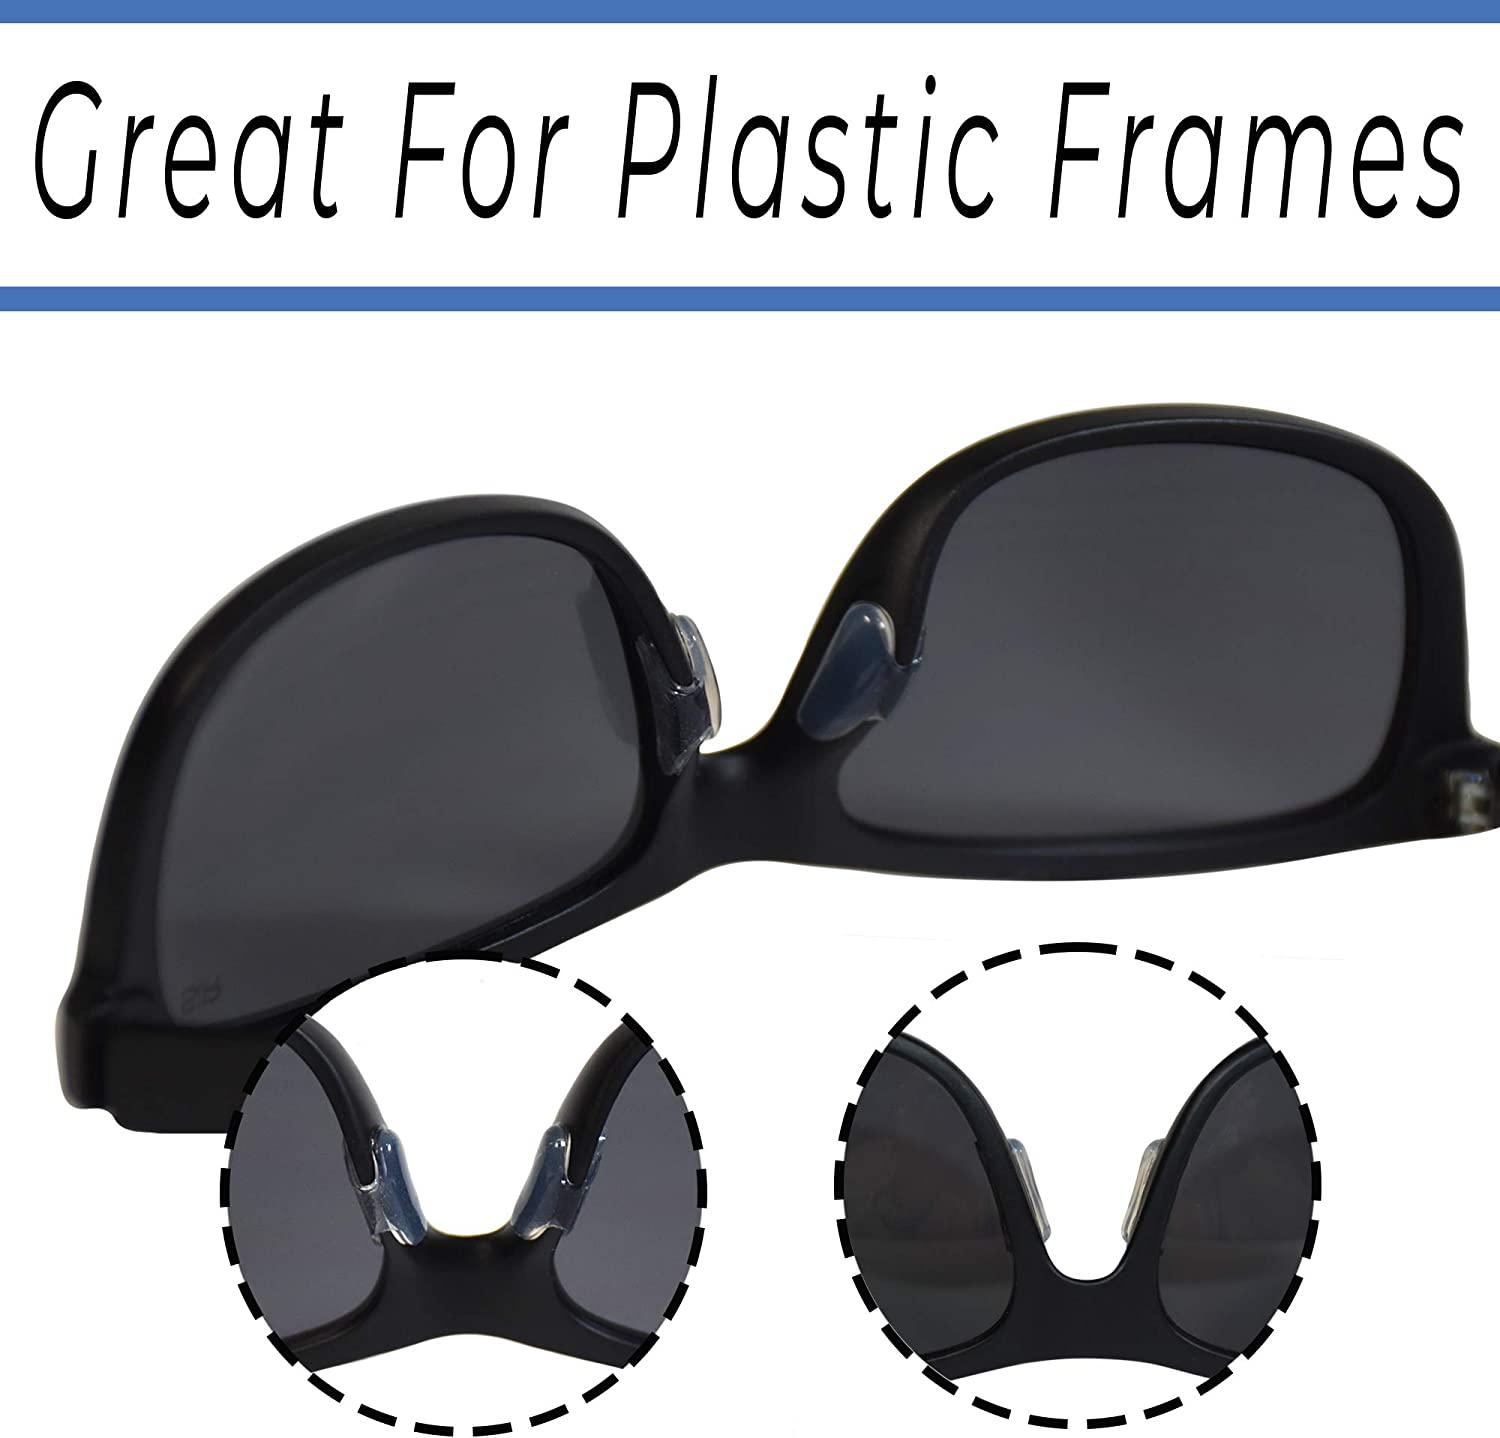  Adhesive Eye Glasses Nose Pads Cushion, Anti Slip Nose Grips  for Glasses with Airbag, Sunglasses Nose Protector, Eyeglasses Nose Bridge  Pads for Plastic Frames (6Pairs, White) : Health & Household